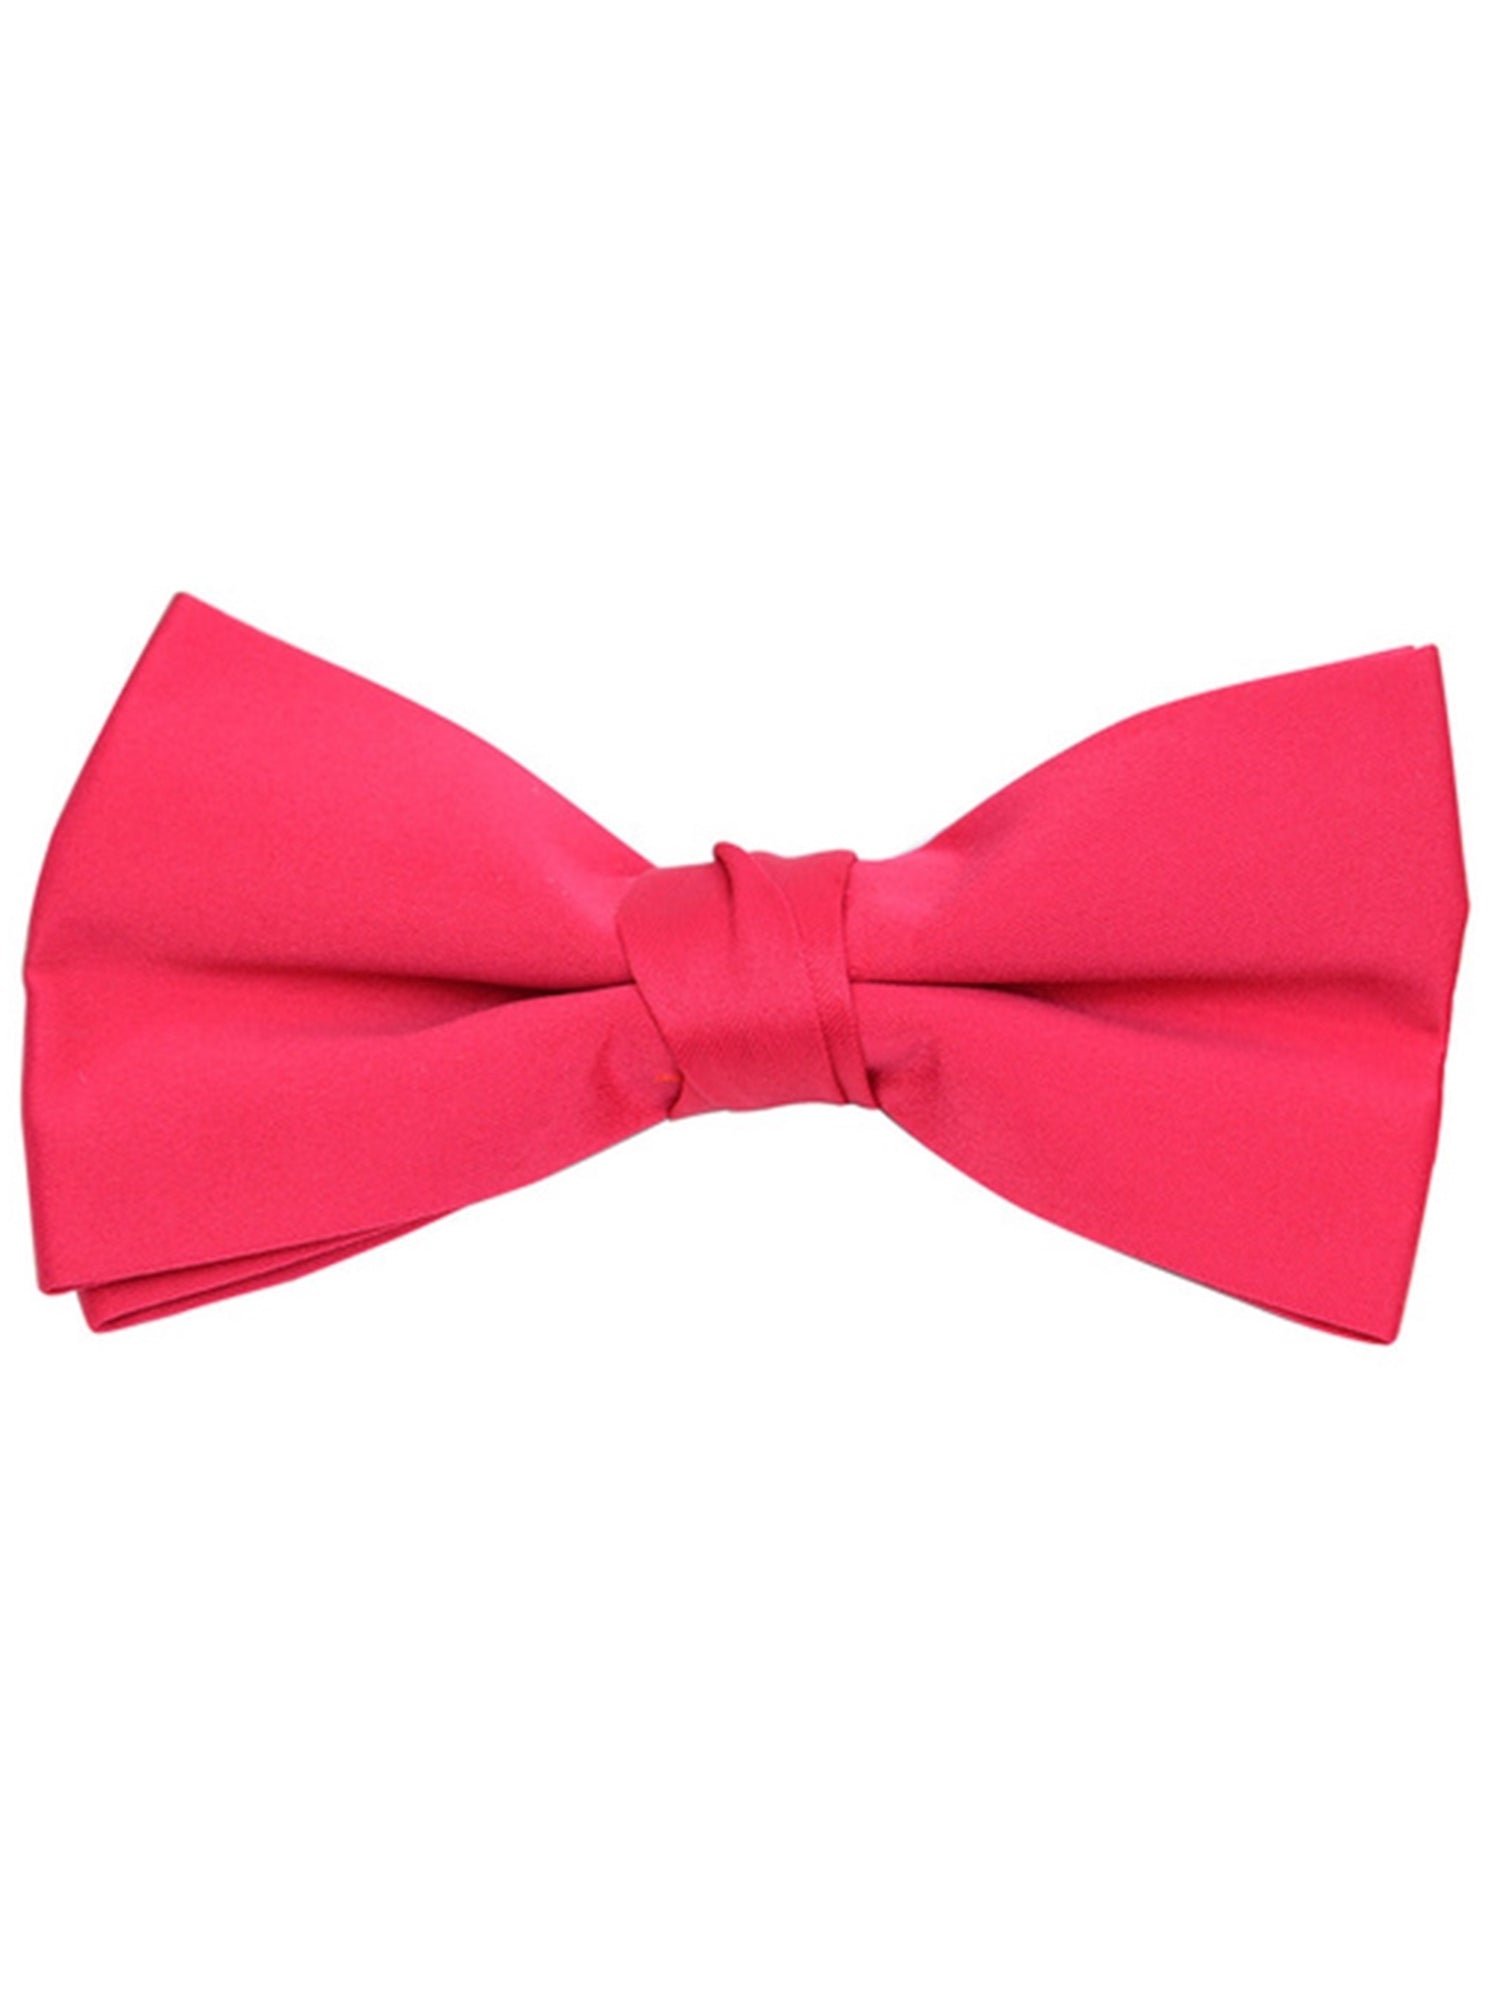 Young Boy's Pre-tied Clip On Bow Tie - Formal Tuxedo Solid Color Boy's Solid Color Bow Tie TheDapperTie Fuchsia One Size 